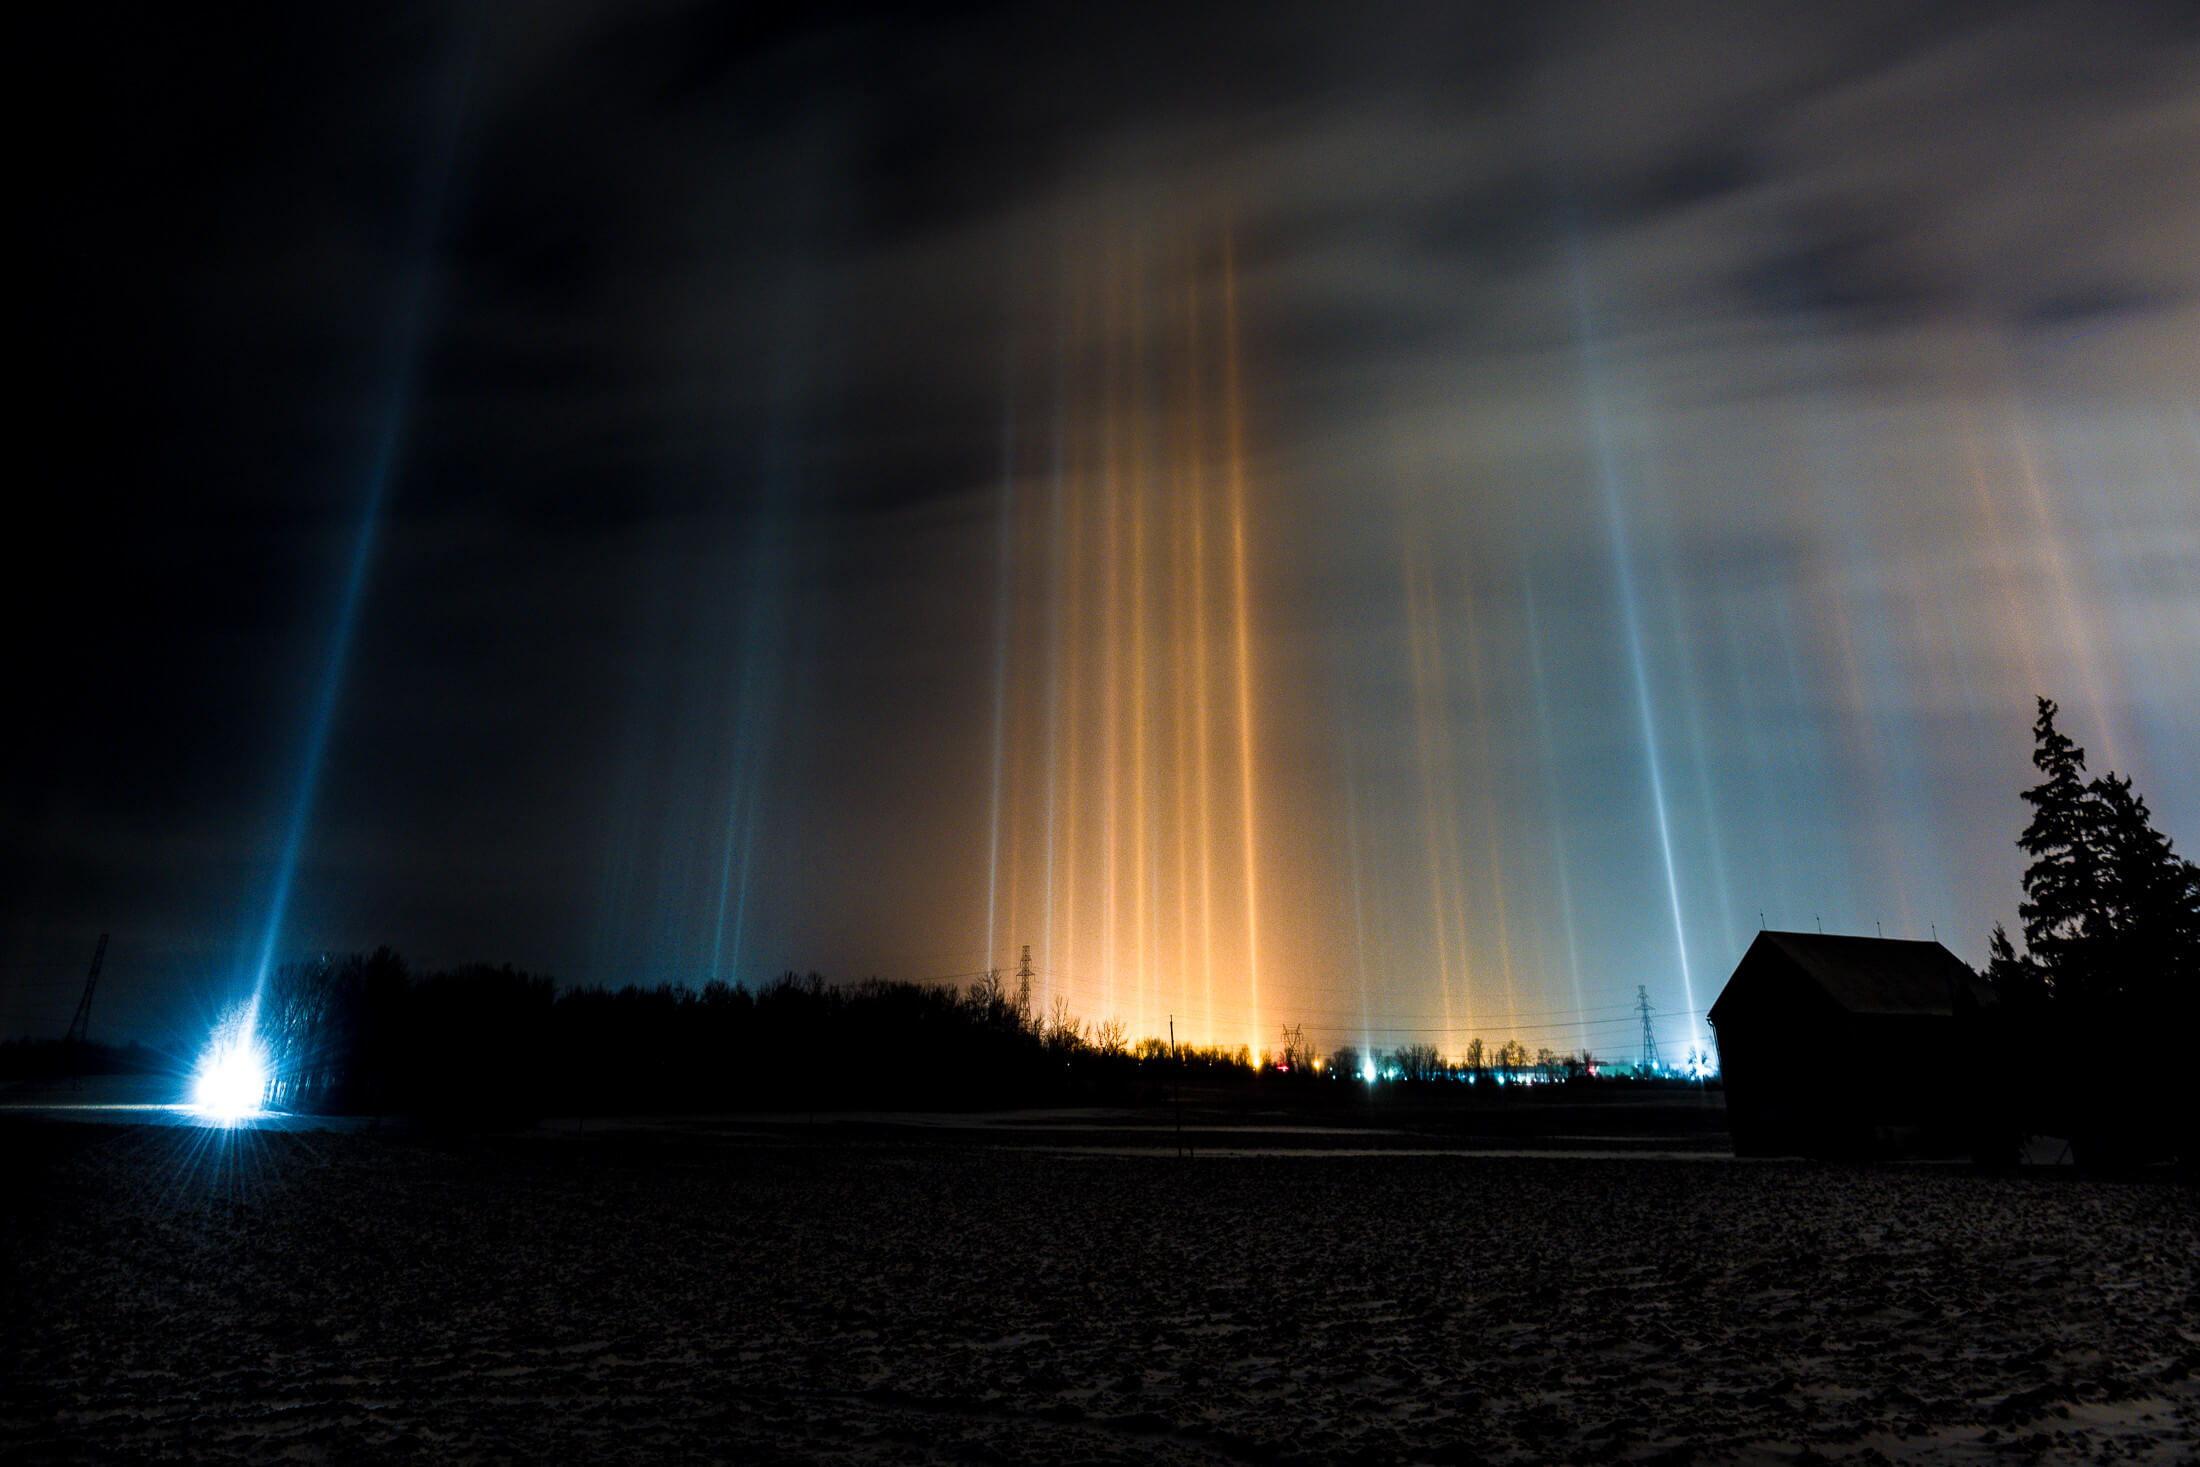 Light pillars can also be caused by the Moon or terrestrial sources, such as streetlights and erupting volcanoes.